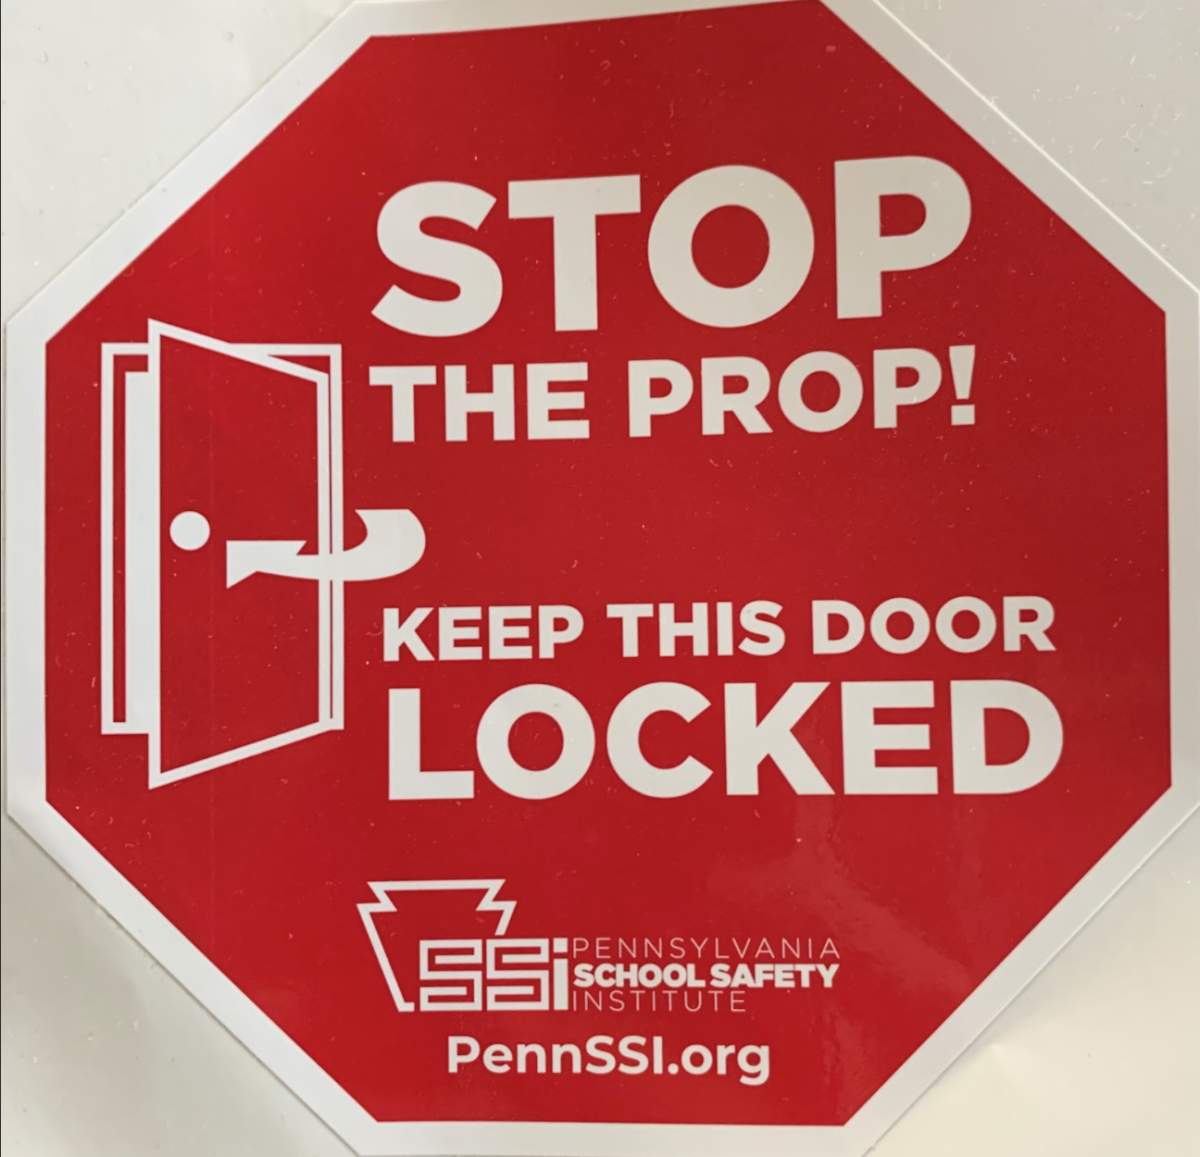 Sticker+from+Garrett+Seddon+telling+people+to+%E2%80%9CStop+The+Prop%E2%80%9D.+These+stickers+will+be+found+on+doors+that+have+been+propped+open+to+encourage+students+to+stop+leaving+doors+open.